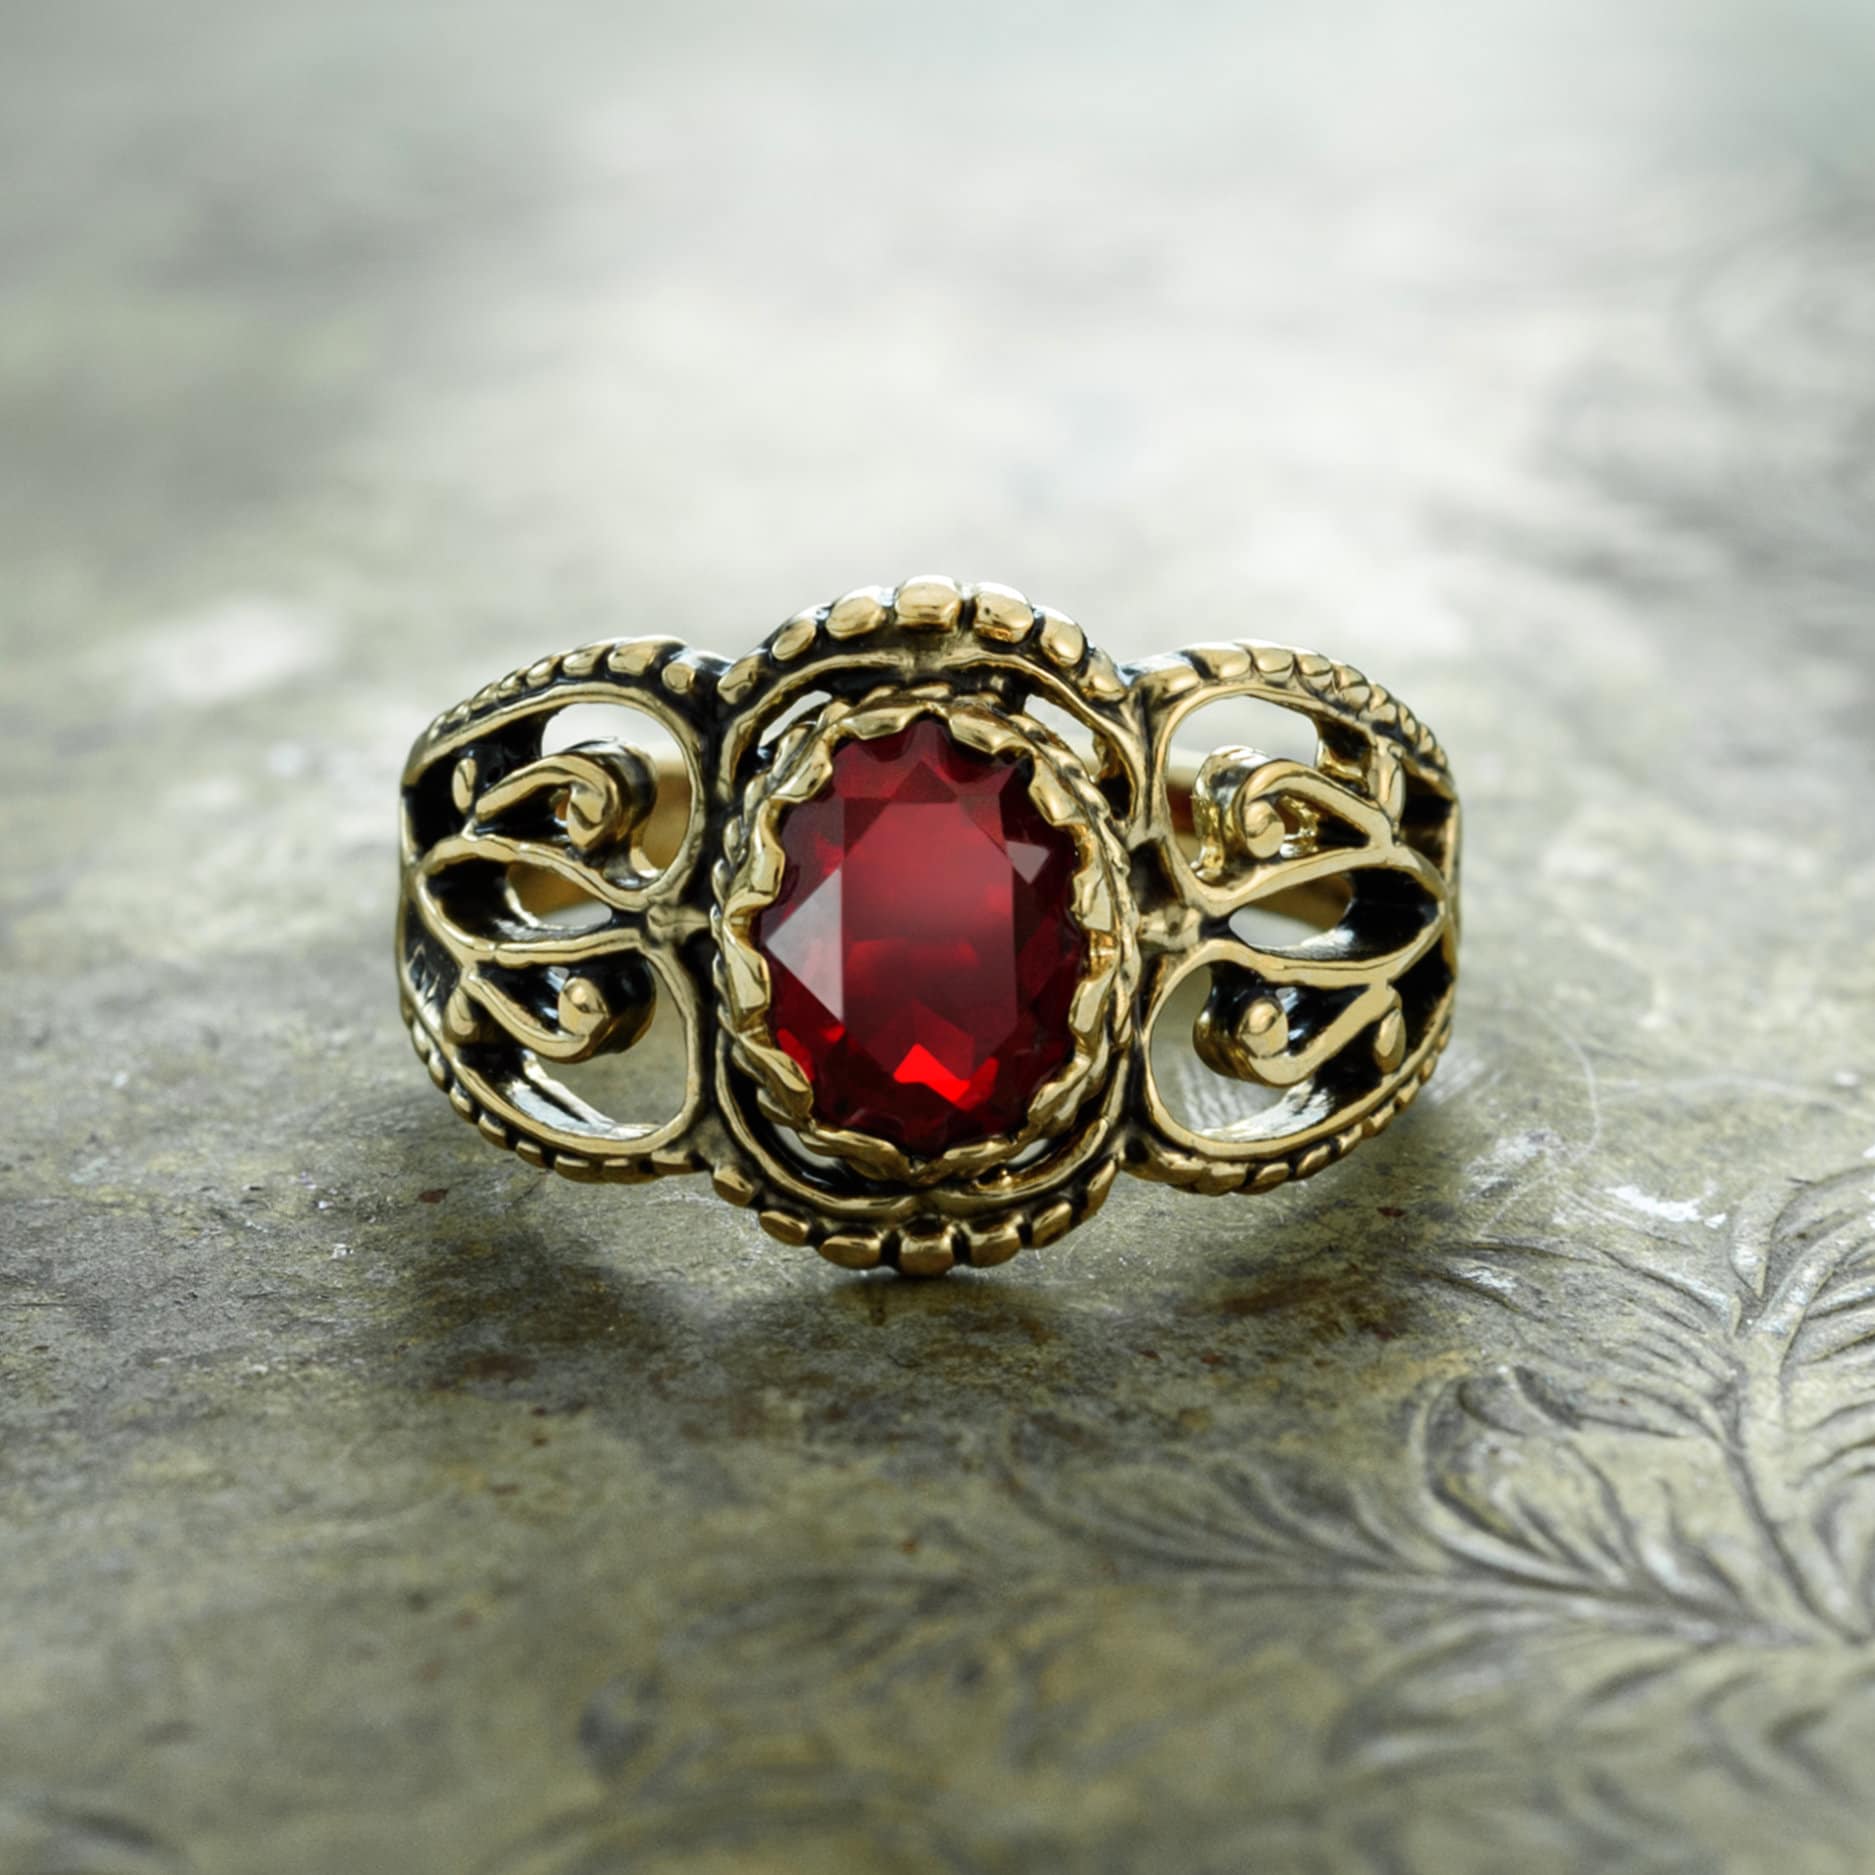 Buy quality 22 carat gold red stone gents ring RH-GR834 in Ahmedabad